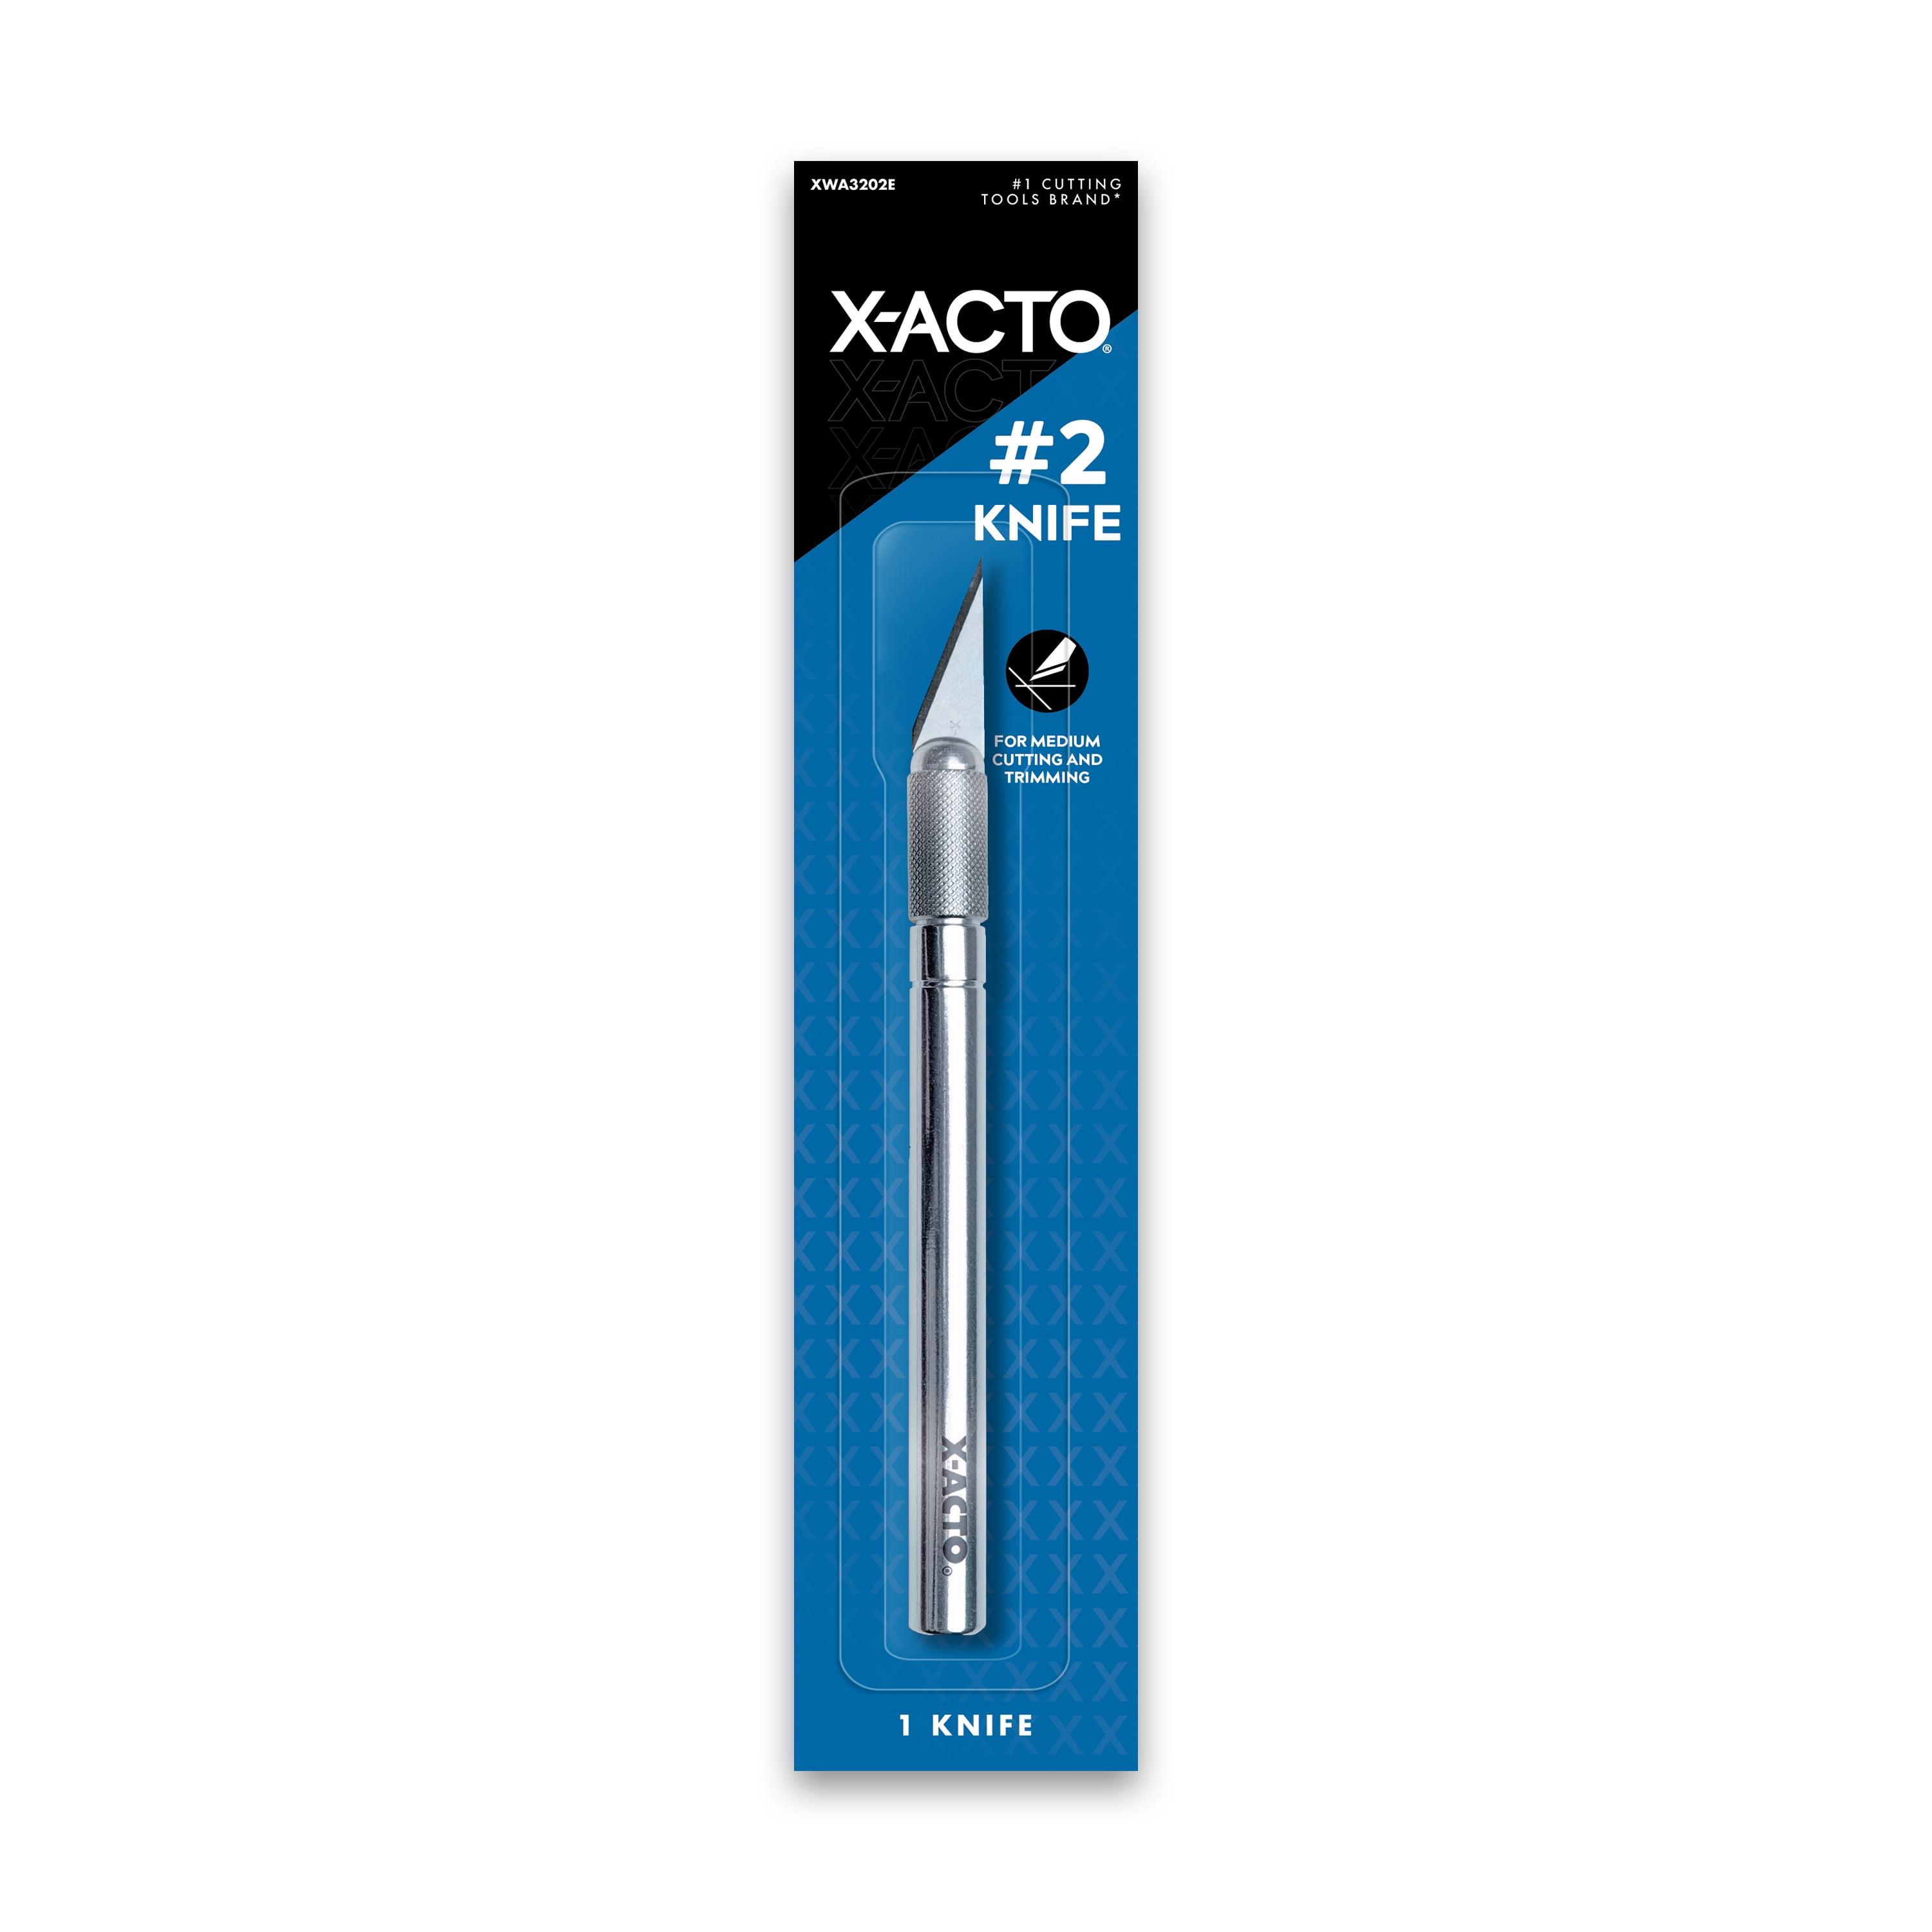 X-ACTO No.2 Standard Medium Duty Knife for Cutting & Trimming